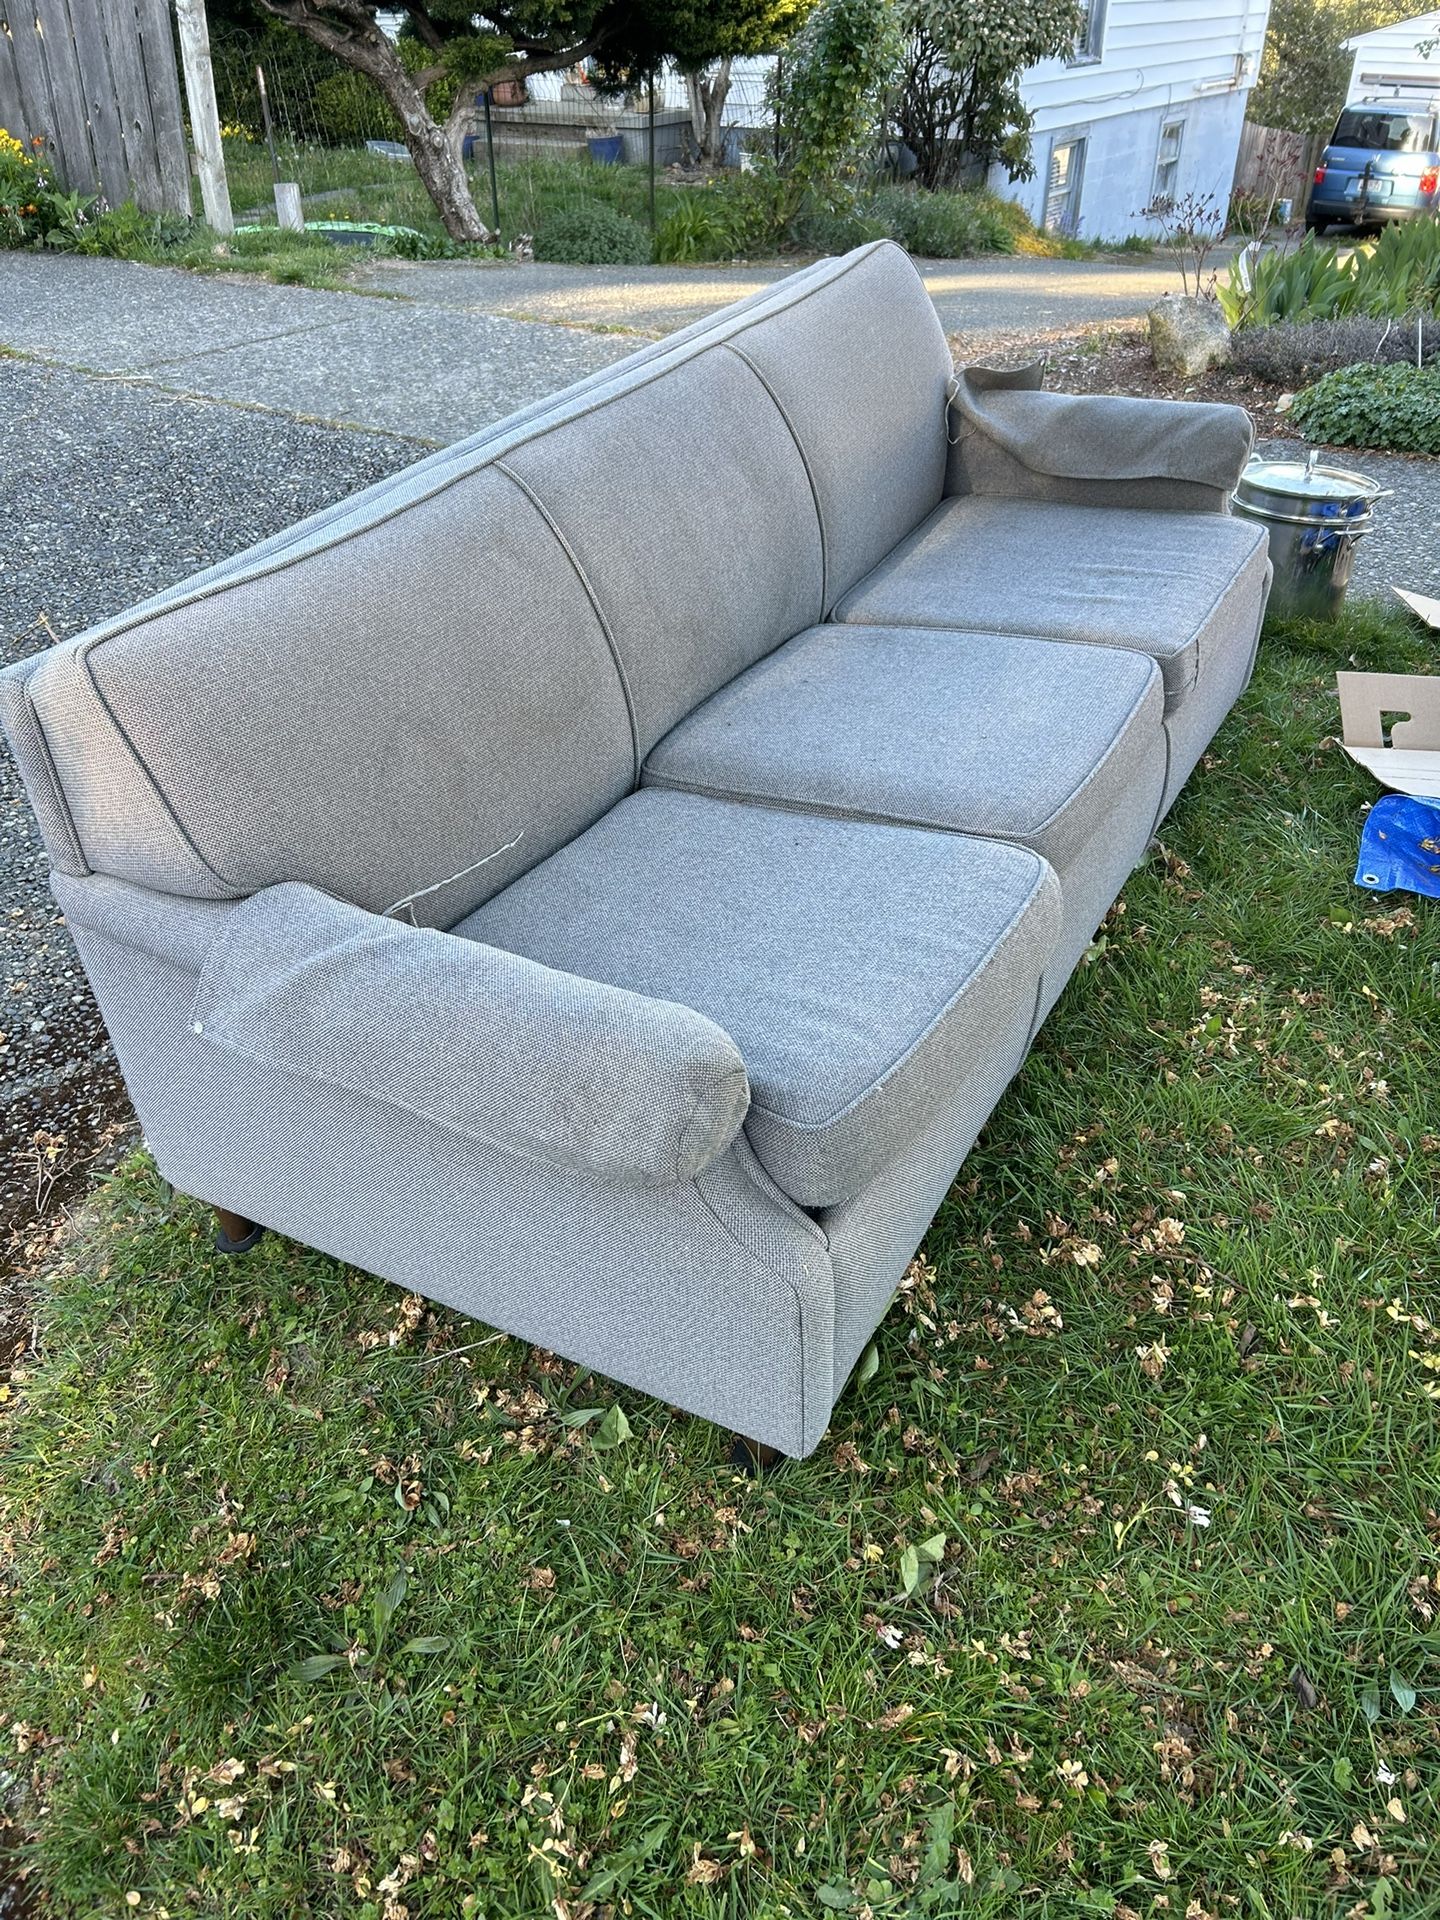 Free Fold Out Couch - Curb Alert!